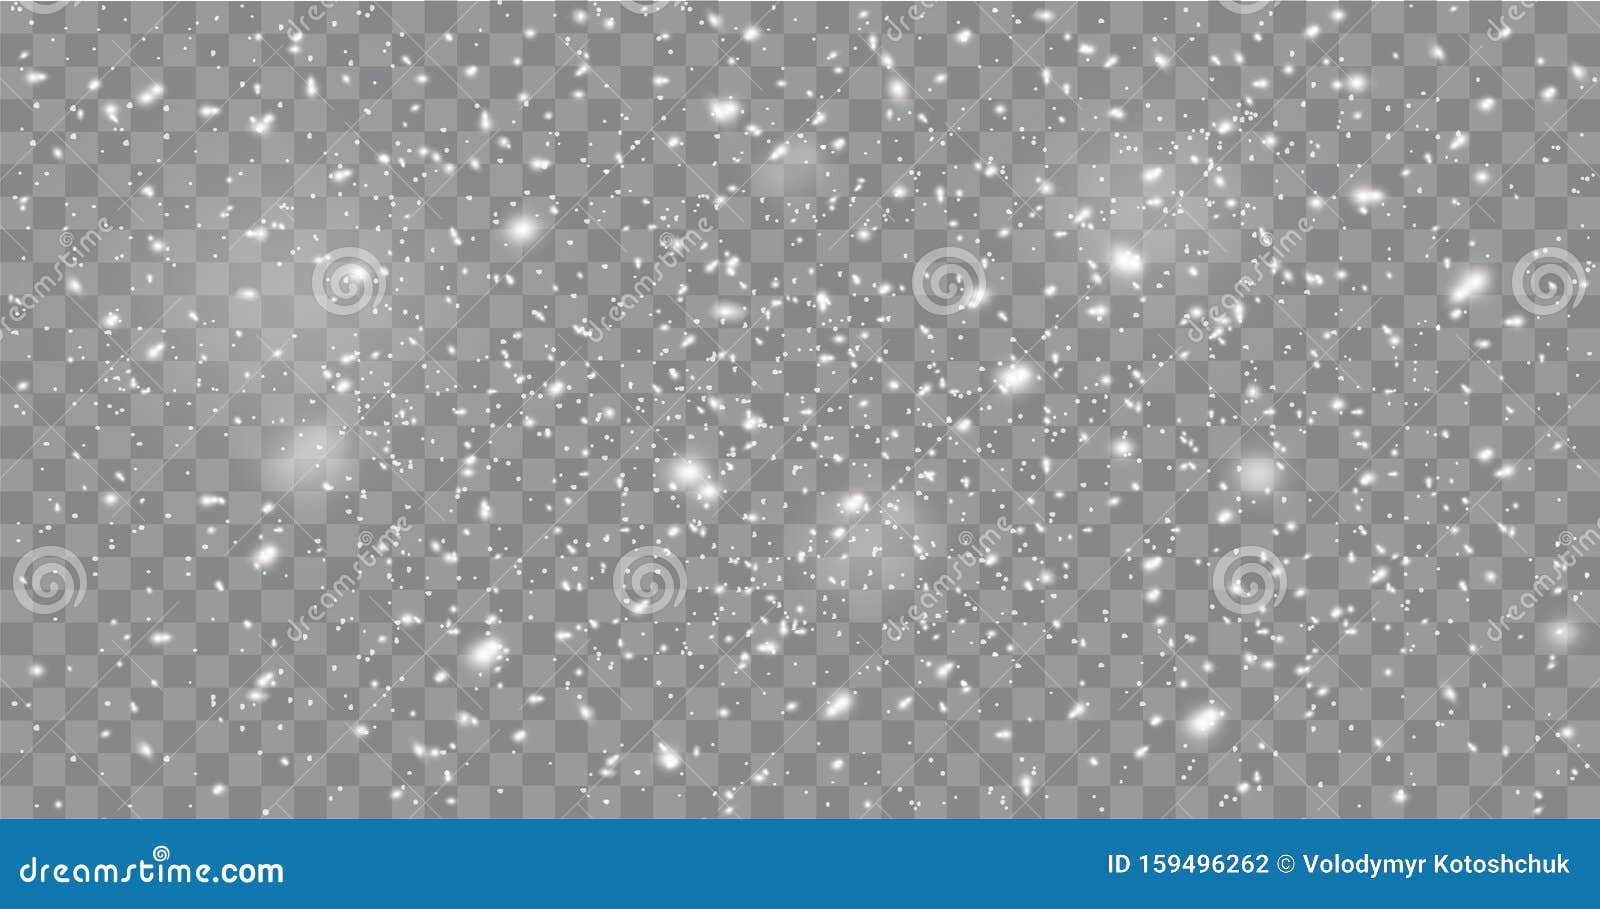 realistic falling snow or snowflakes.  on transparent background - stock 